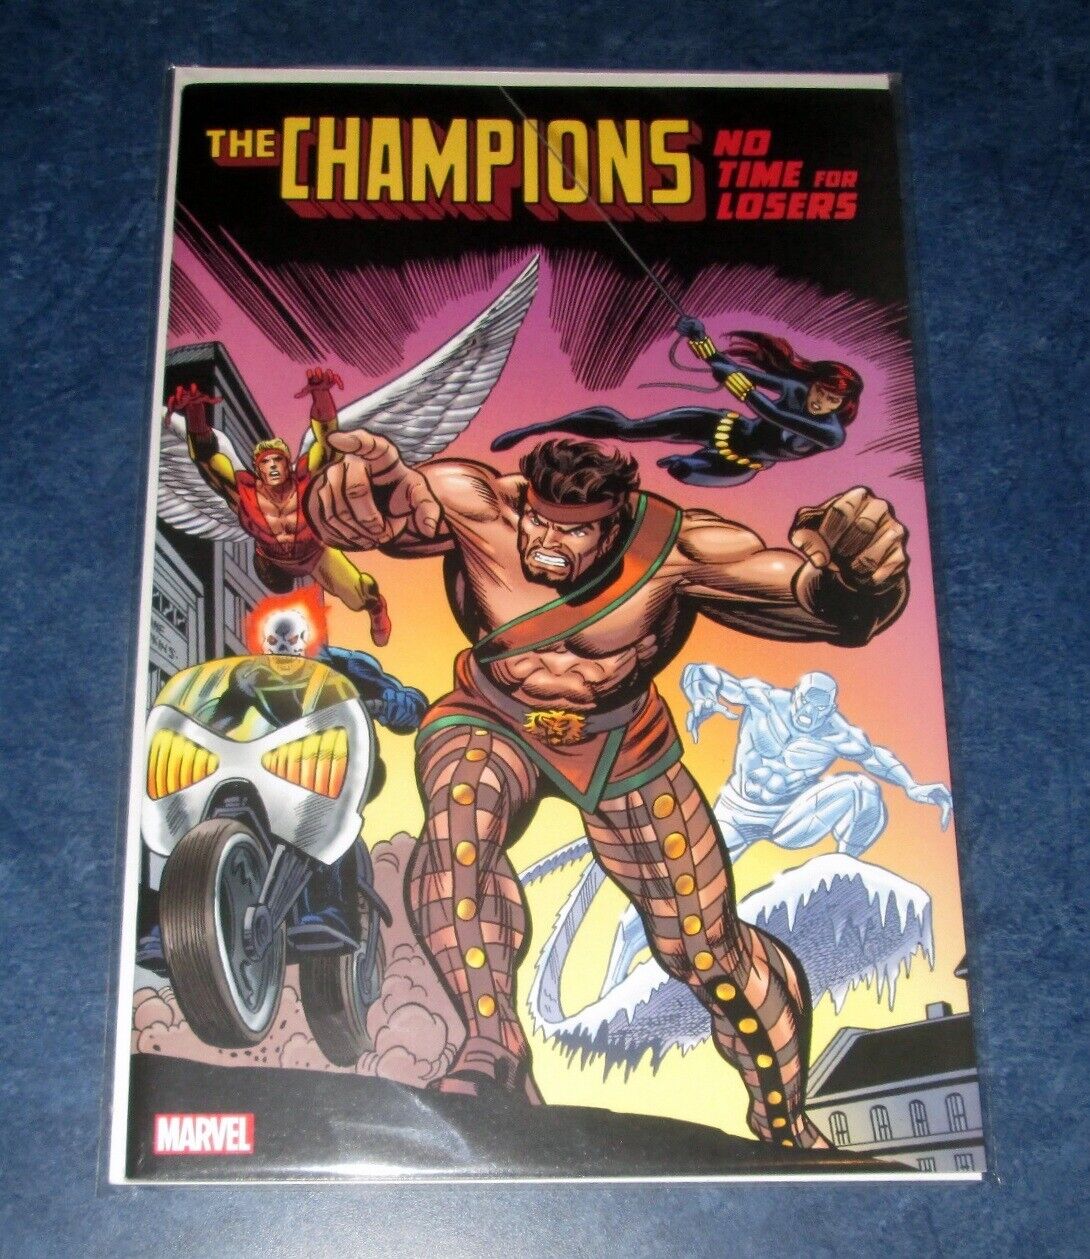 THE CHAMPIONS no time for losers tpb (collects 1 2 3 14 15) 96 pages MARVEL NM